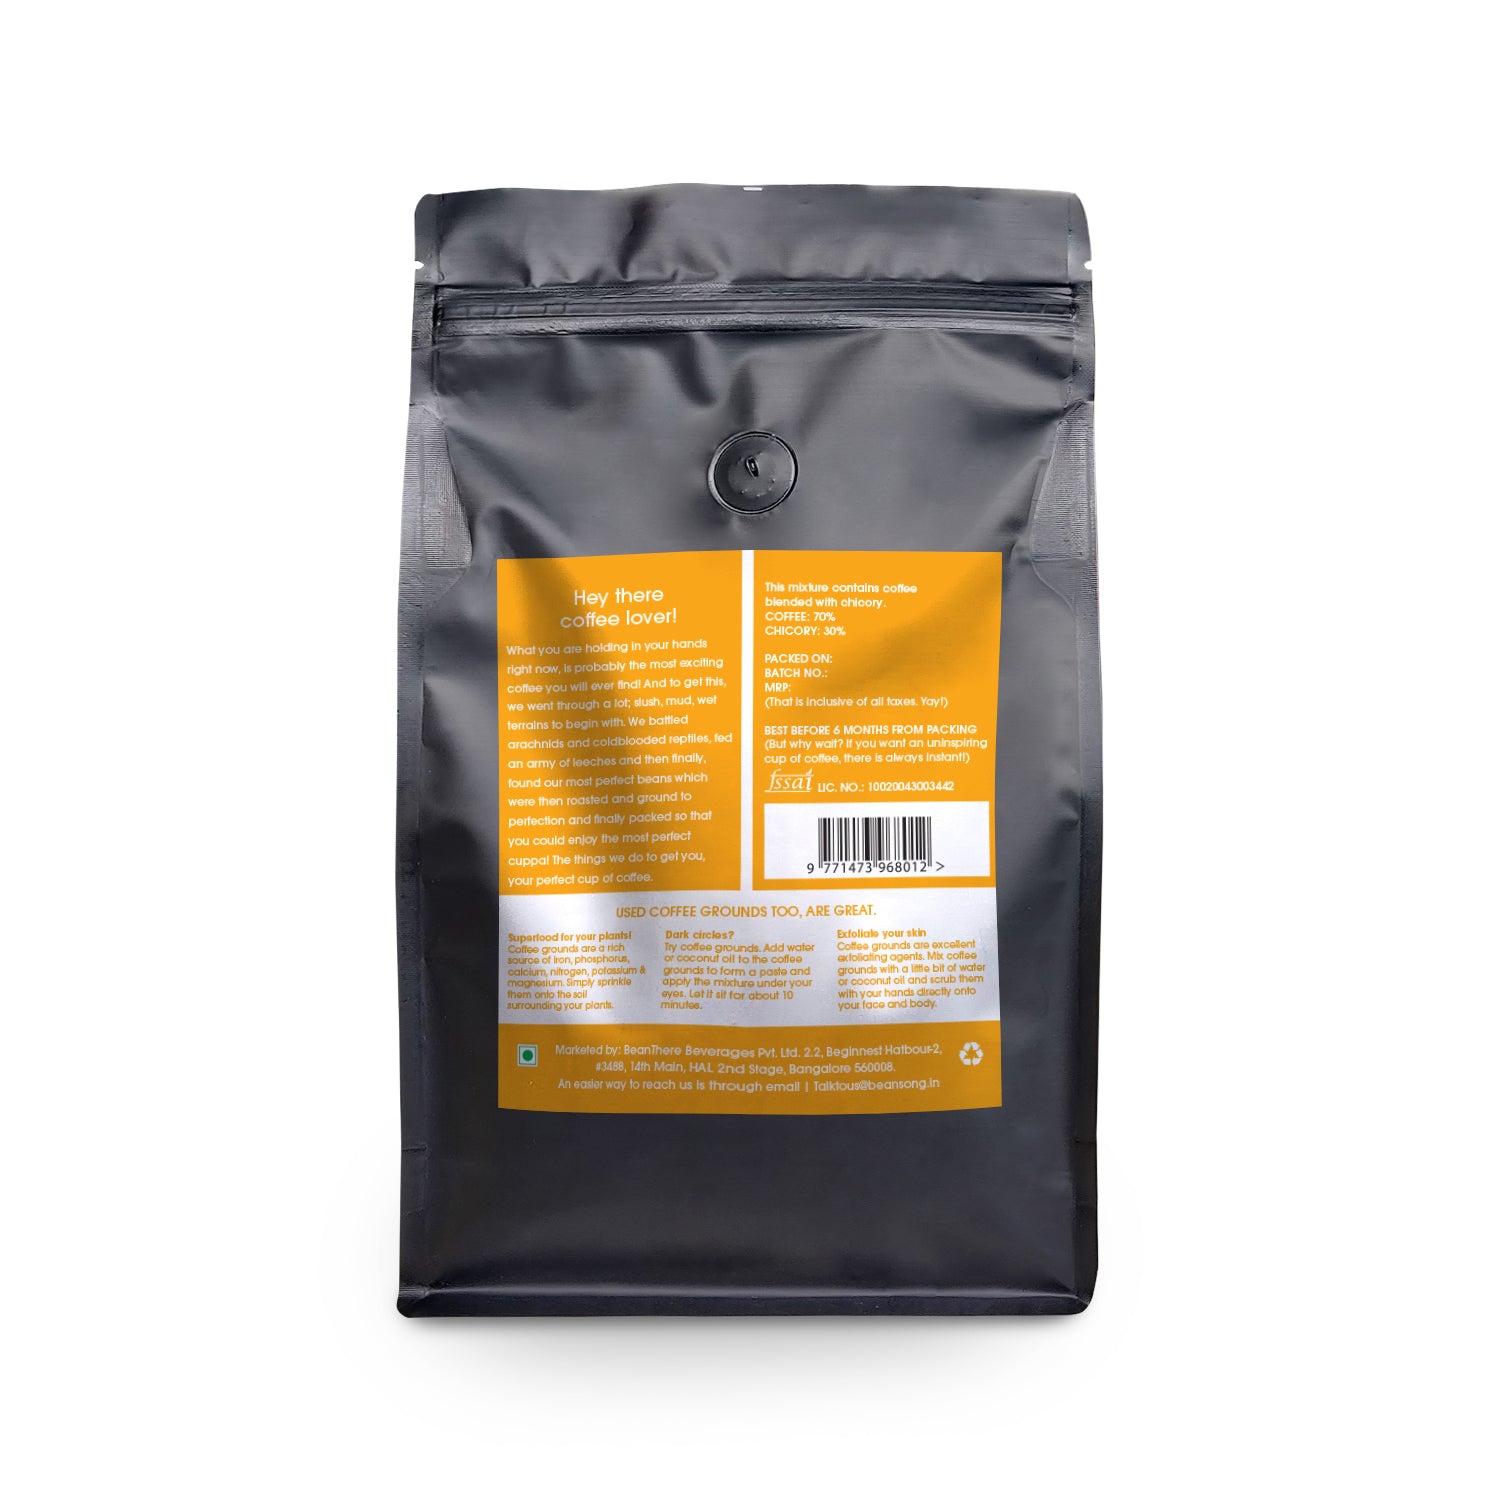 South Indian Filter Coffee with Chicory - Powder(500g)